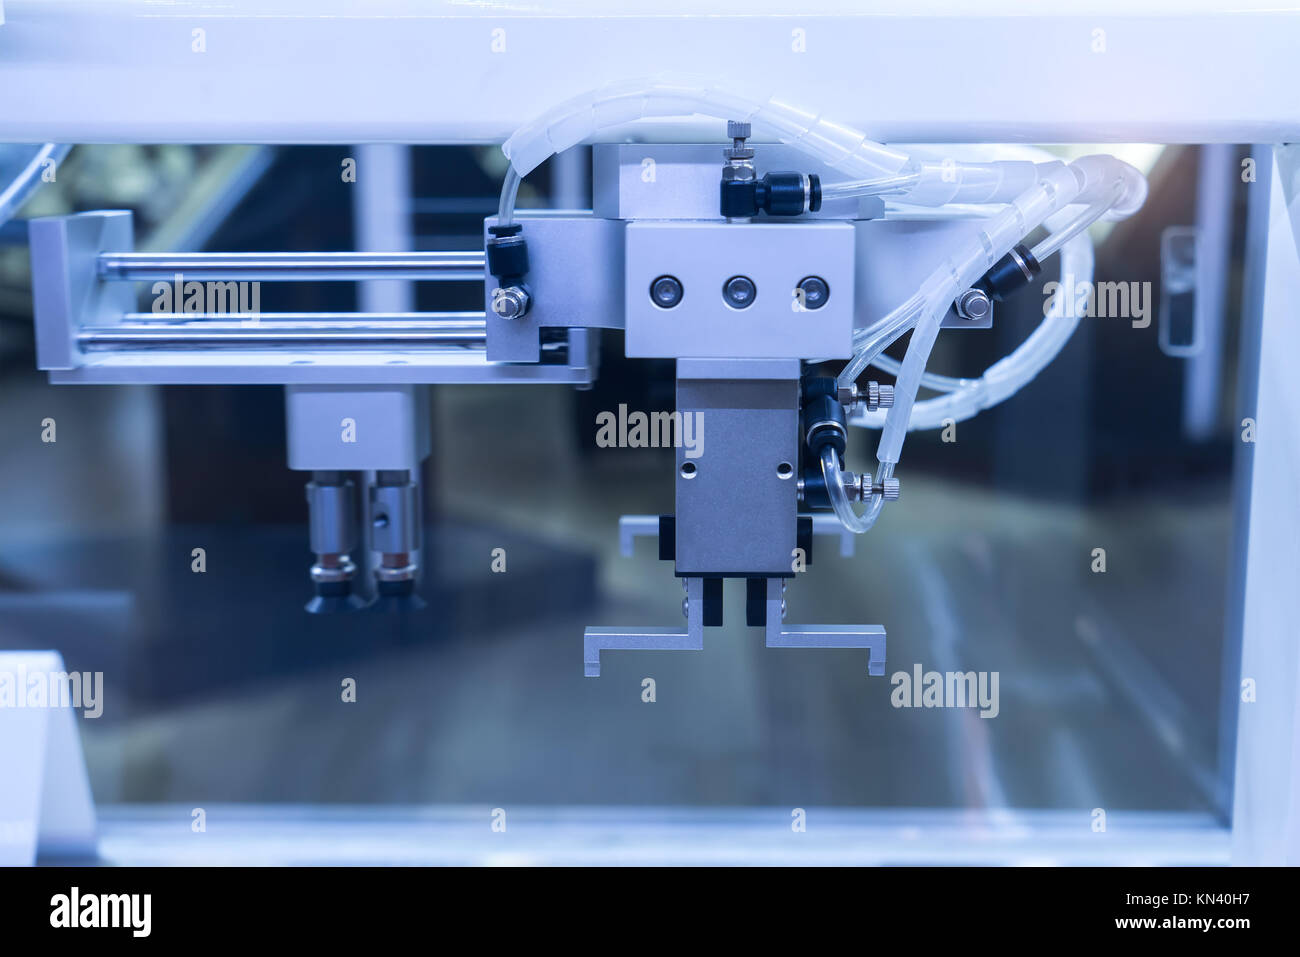 robotic machine tool in industrial manufacture plant,Smart factory industry 4.0 concept. Stock Photo